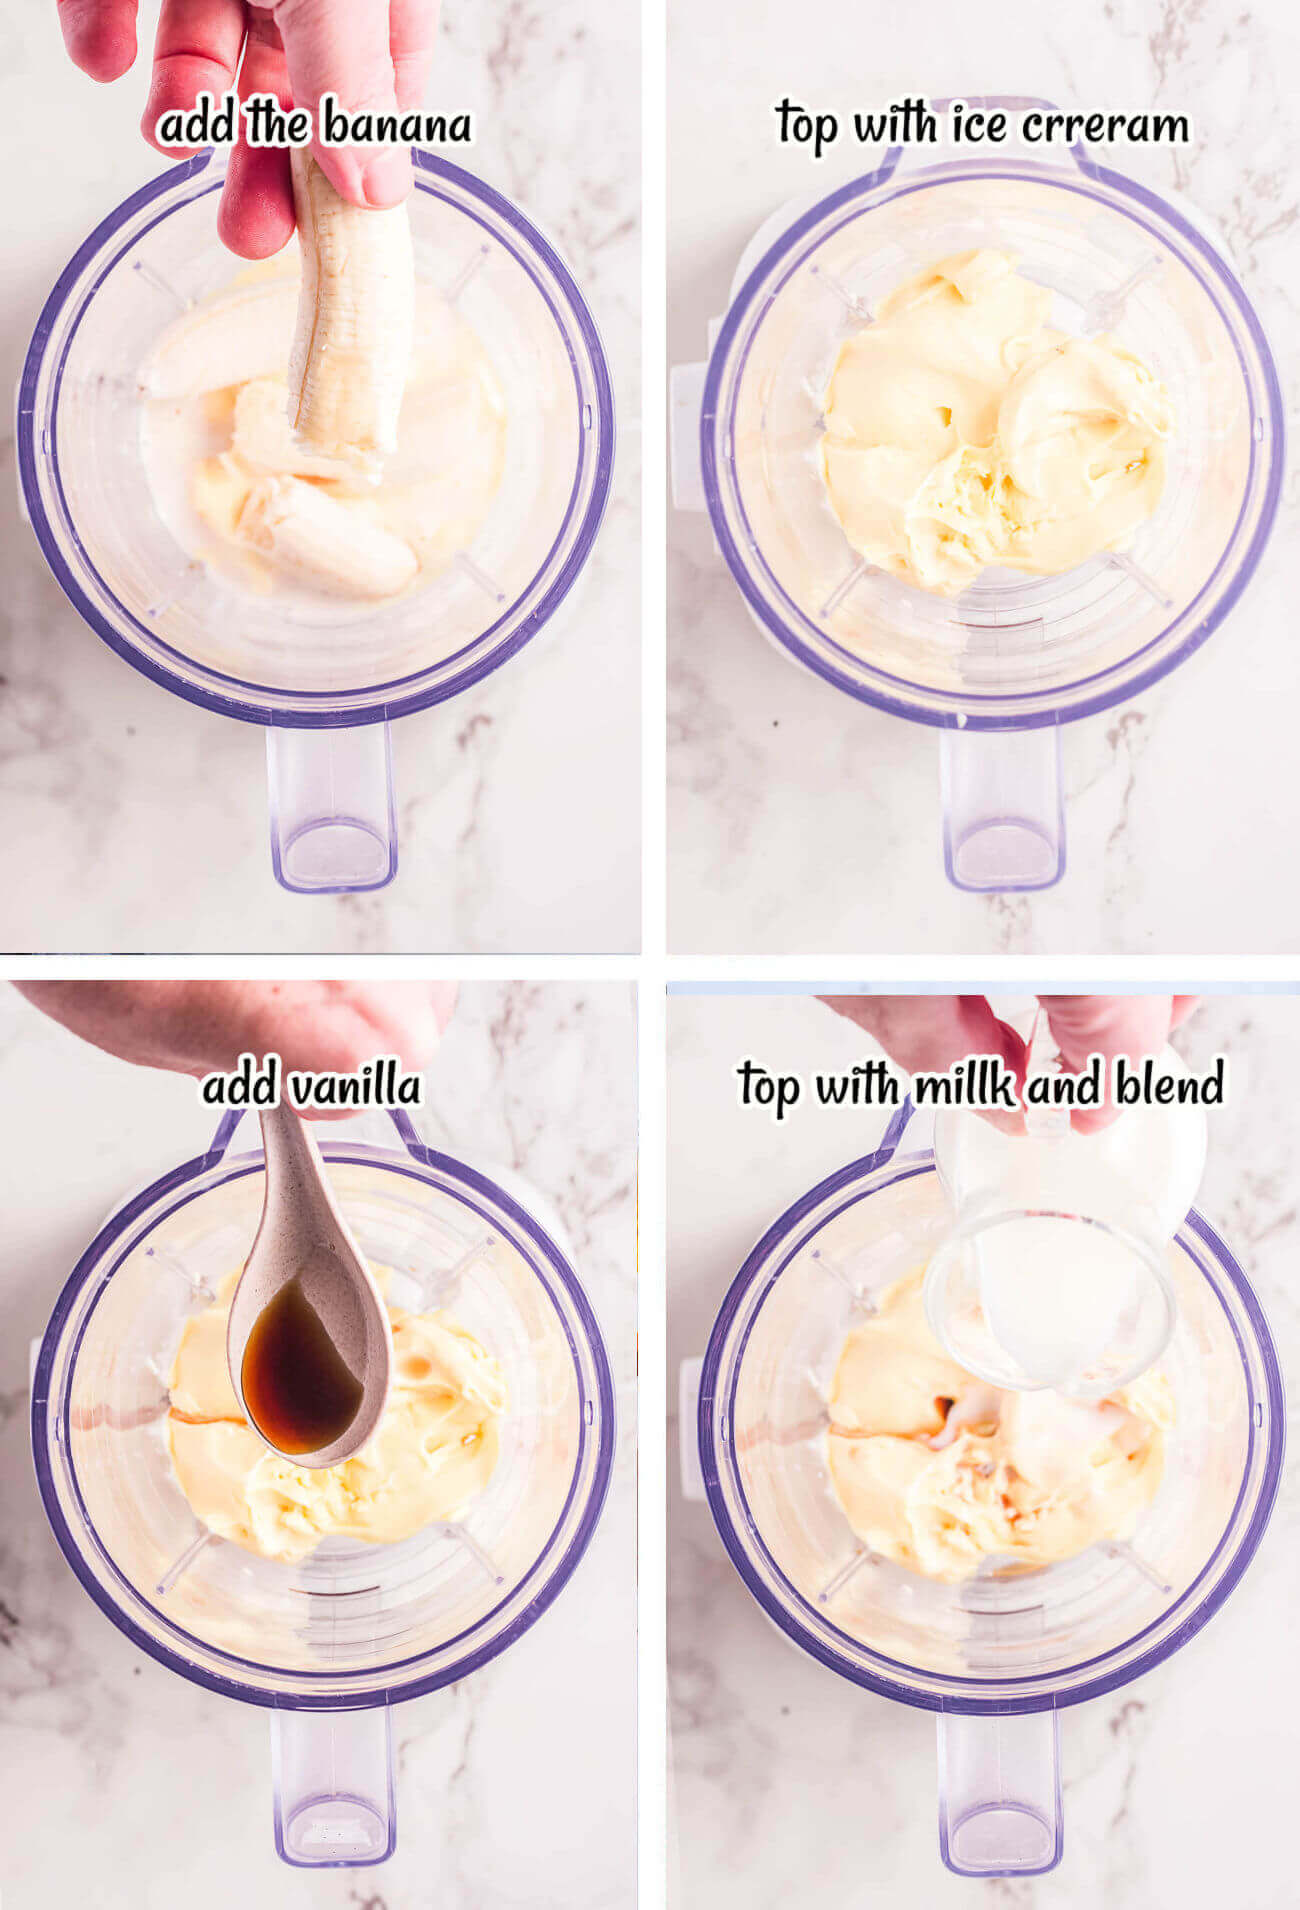 Step by step photos showing how to make Banana Milkshake recipe. With Print overlay.